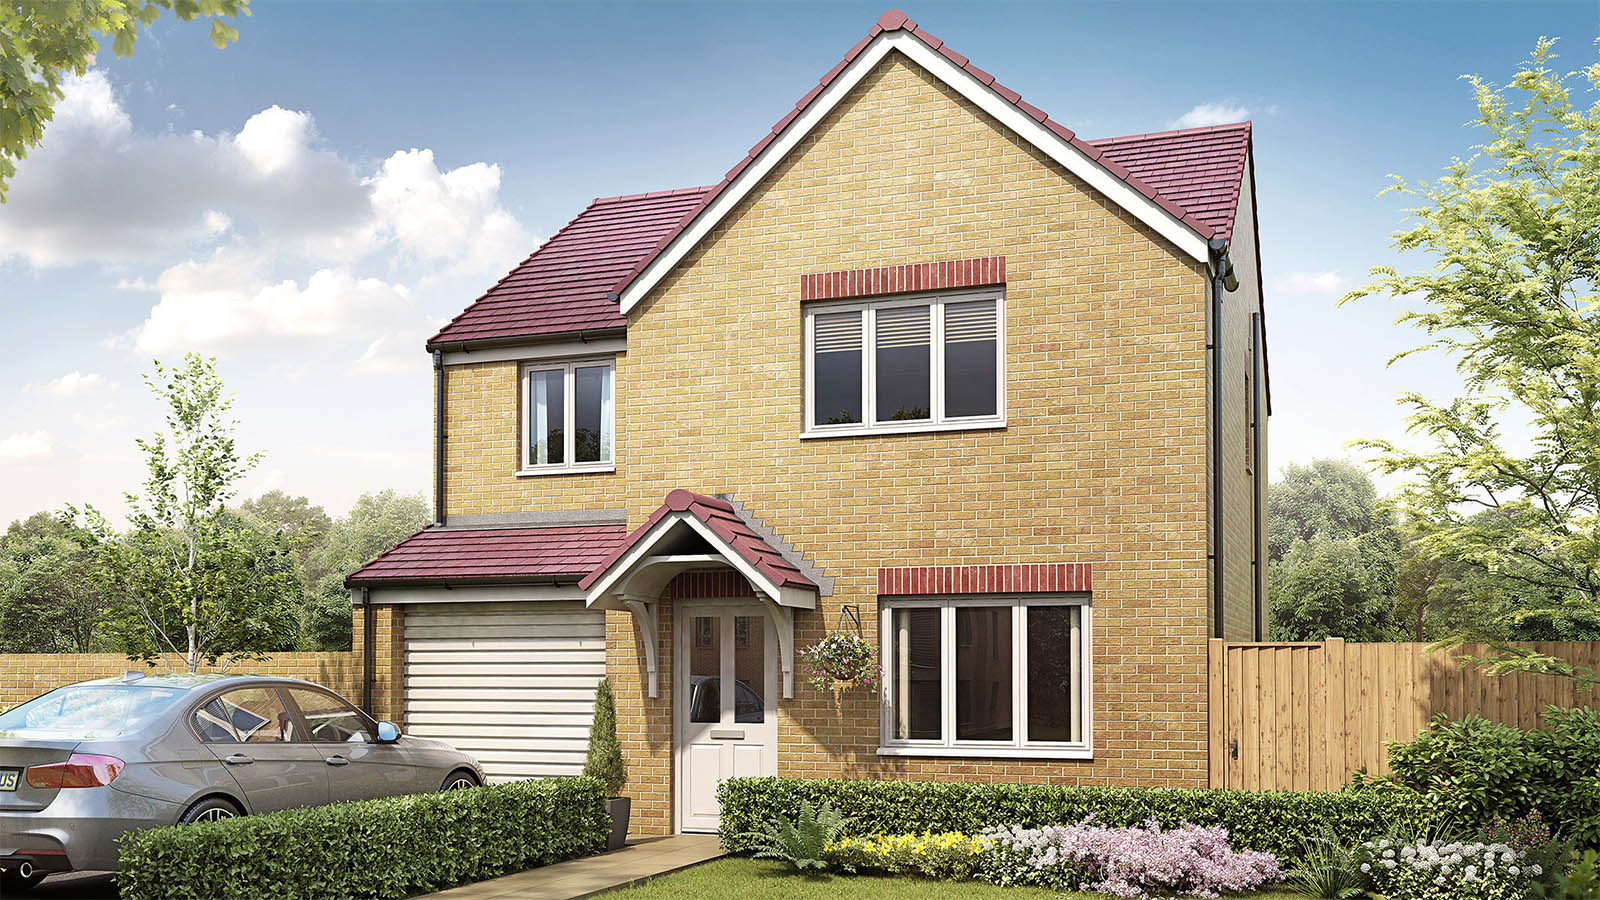 'The Roseberry' at Tawcroft (Persimmon Homes)